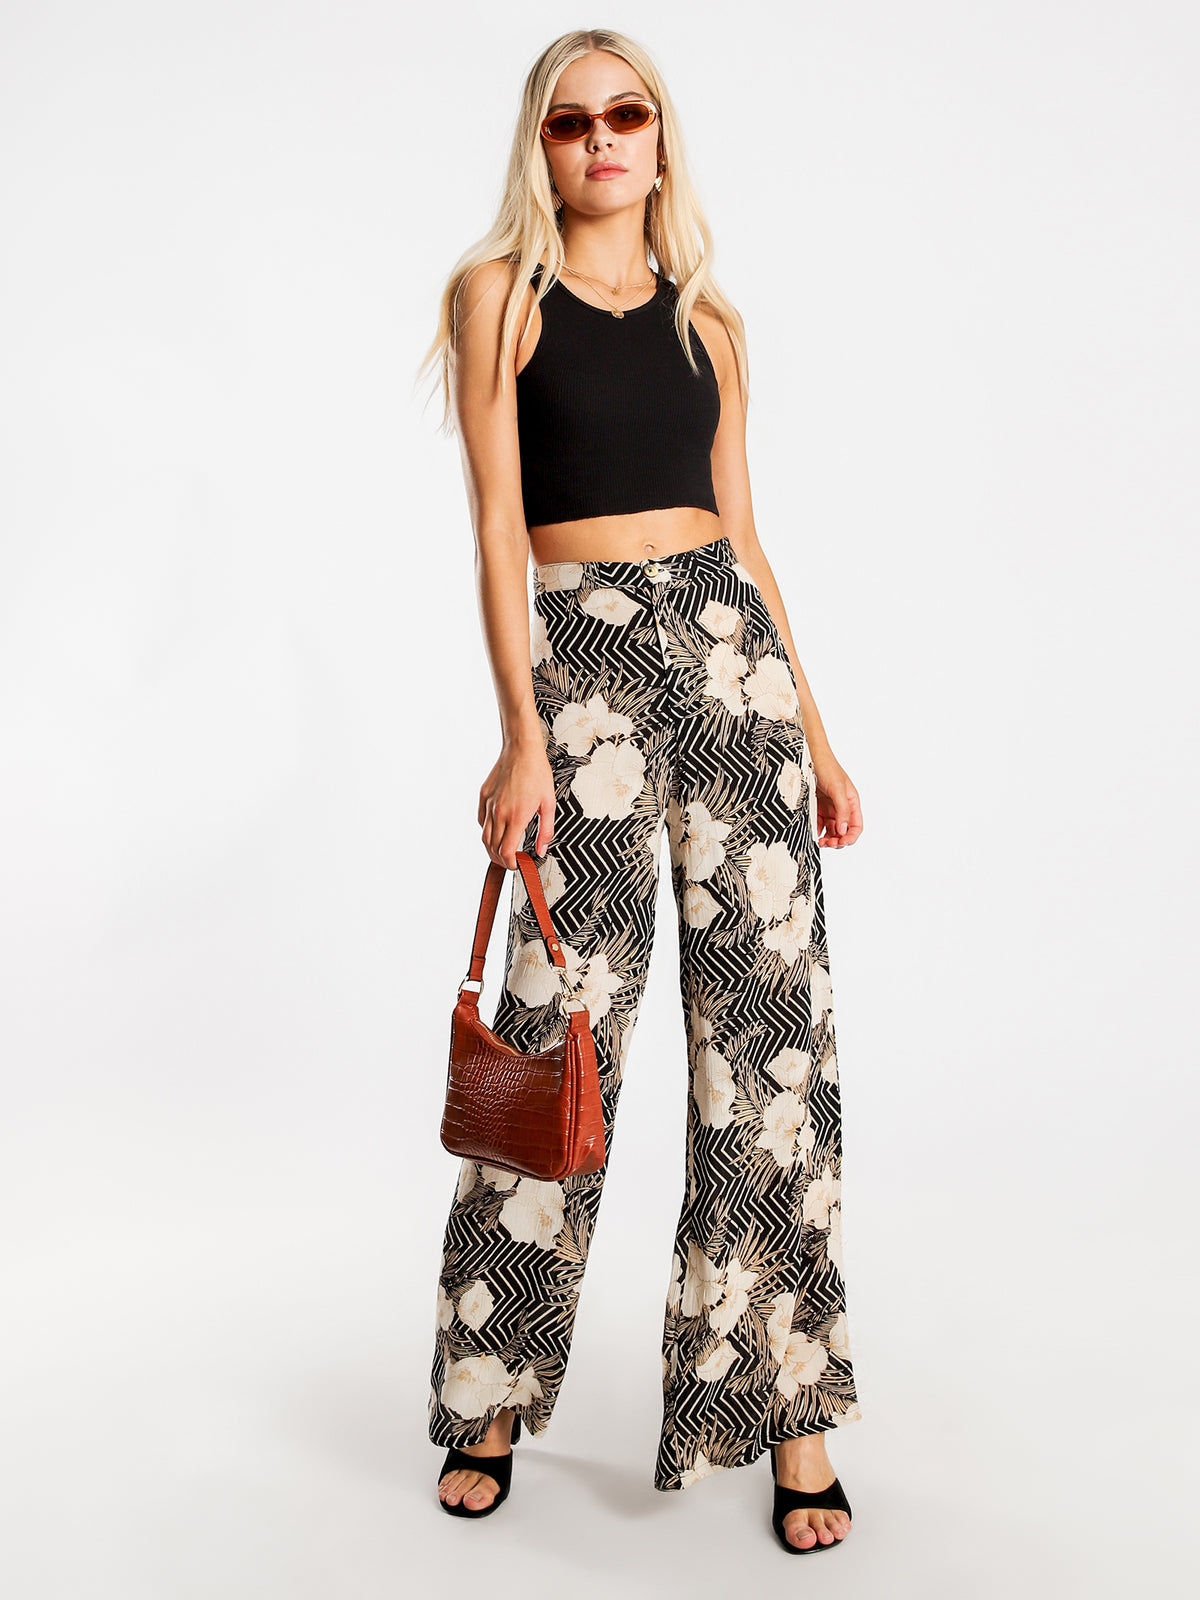 Shady Shack High Waisted Woven Pants in Black